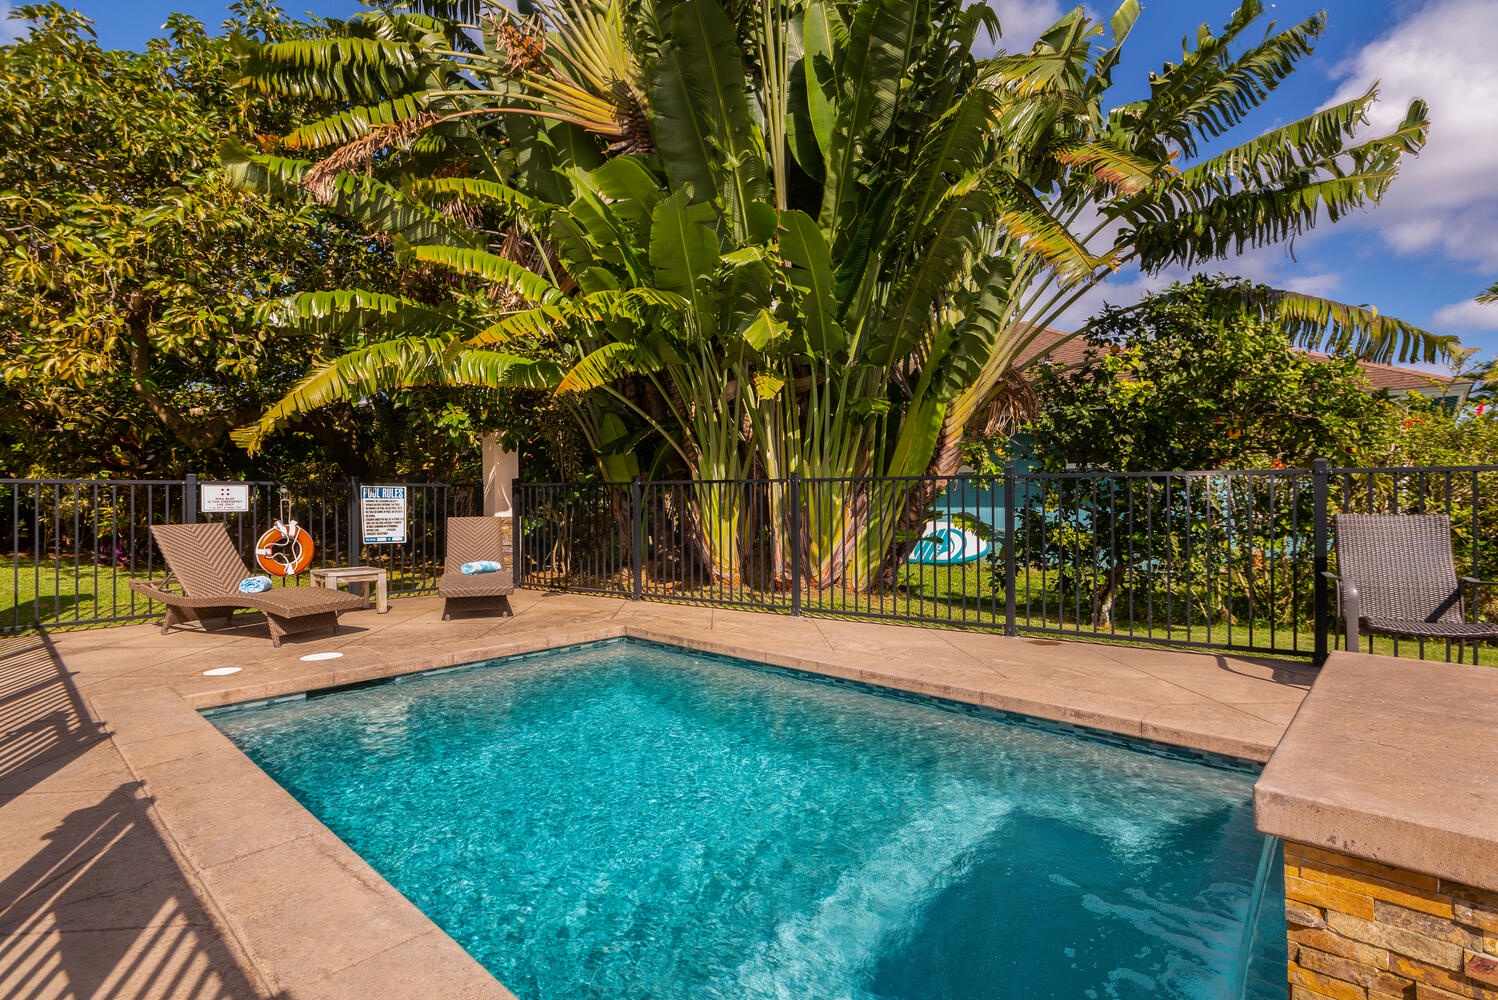 Princeville Vacation Rentals, Pohaku Villa - Relaxing afternoons by the pool